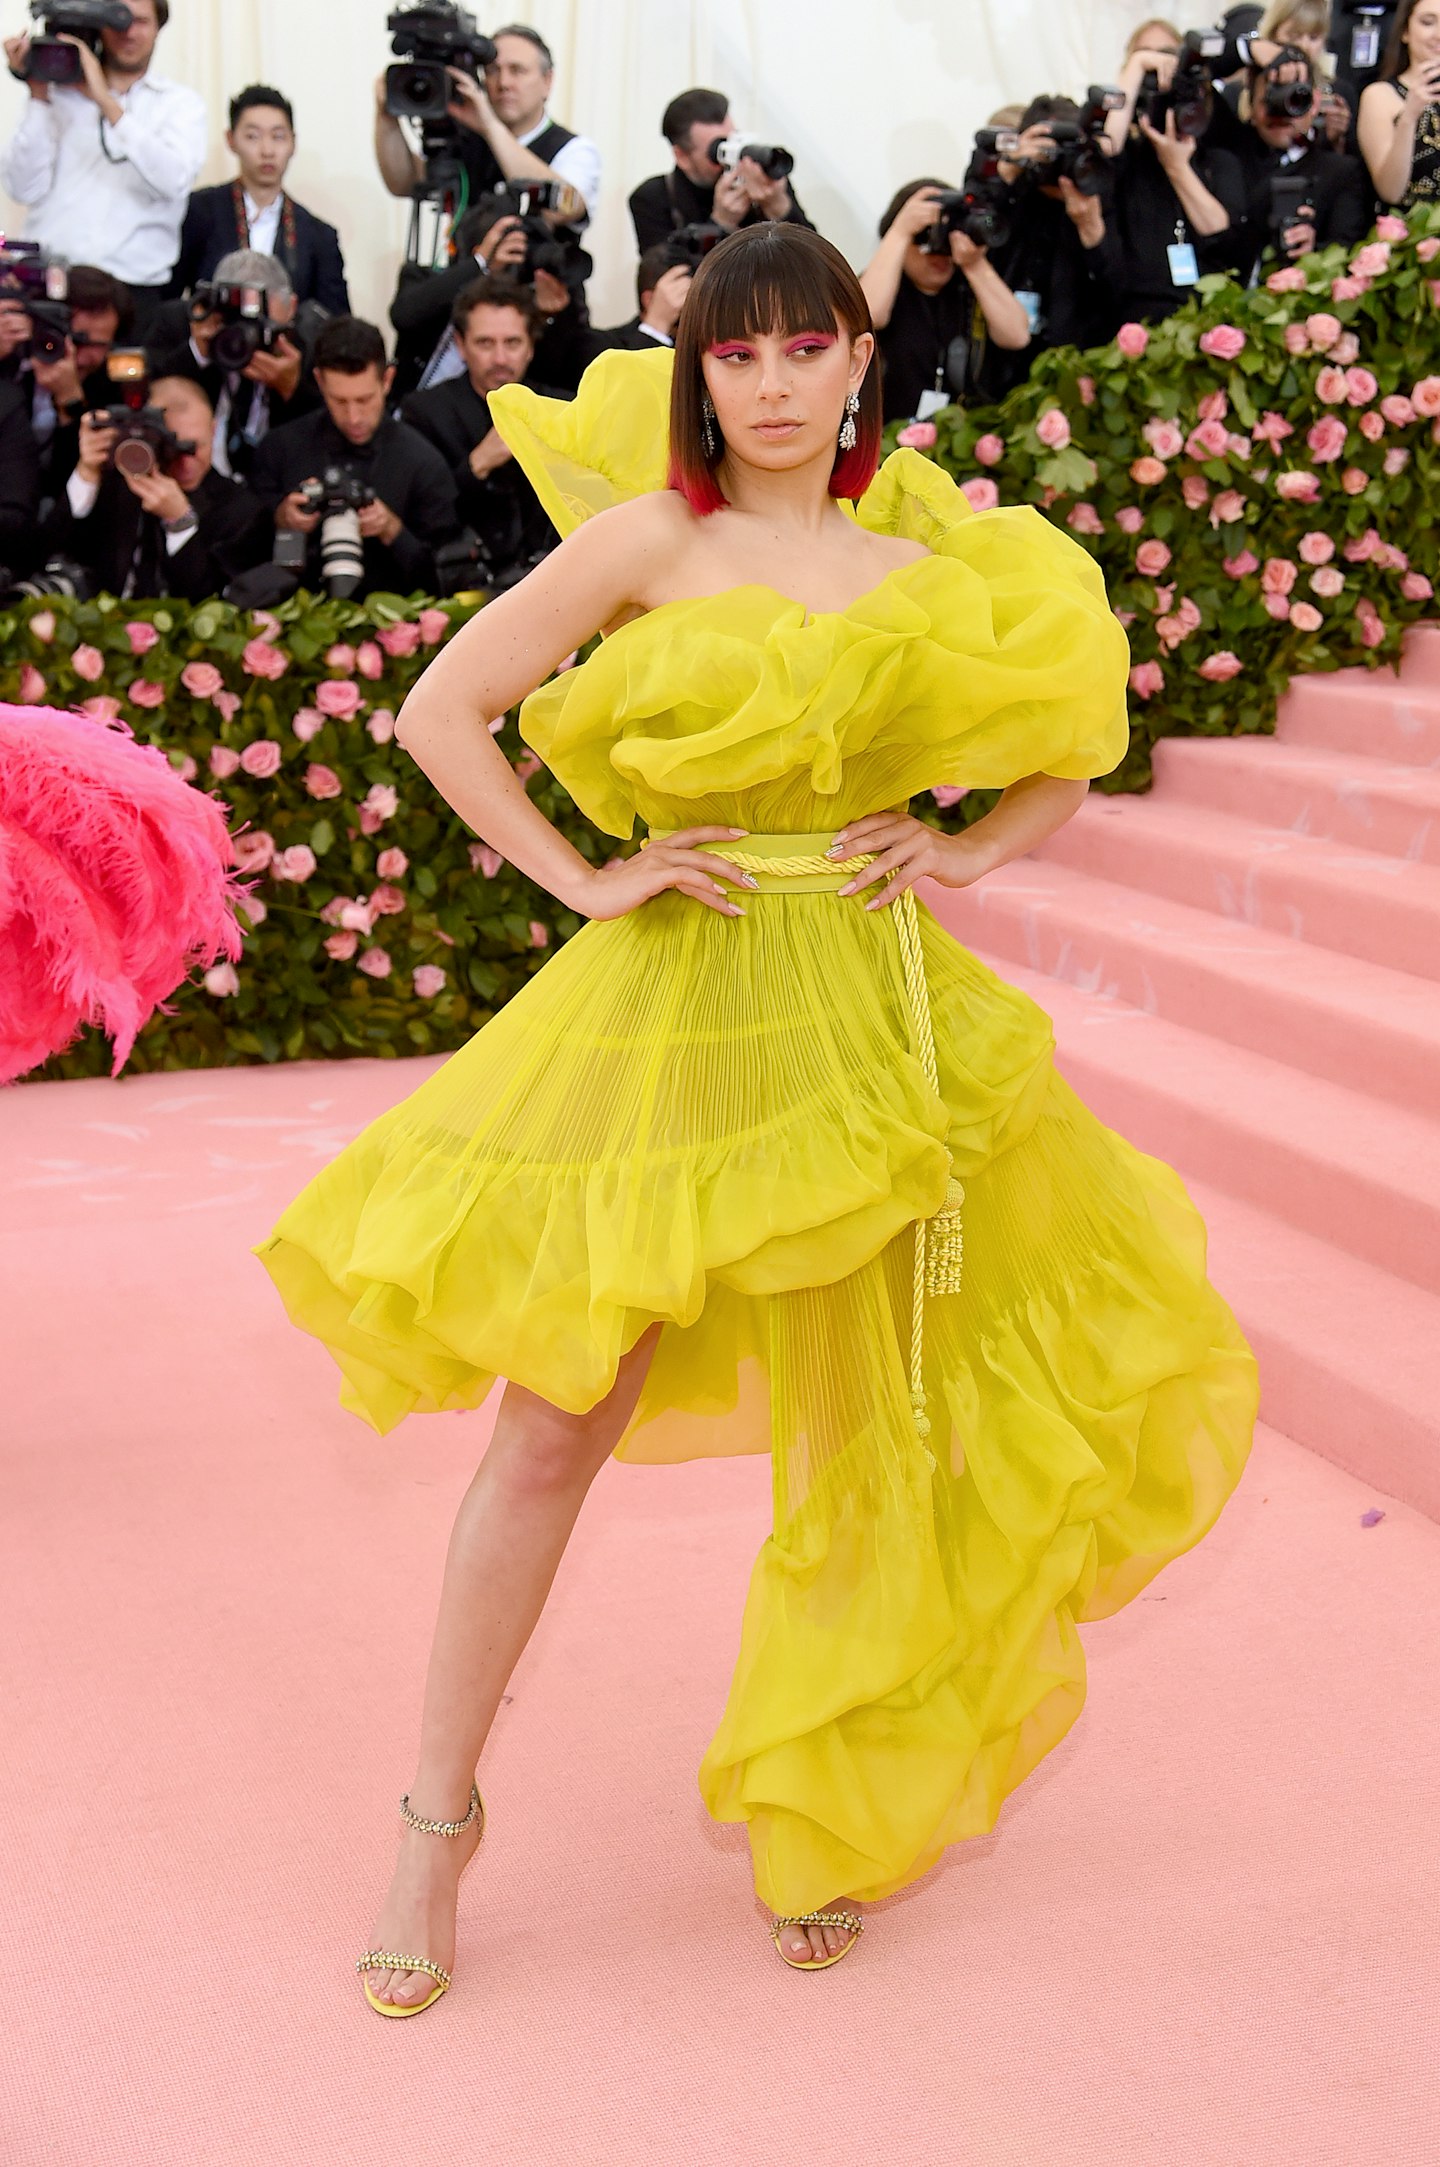 Charli XCX made her Met Gala debut in Jean Paul Gaultier couture